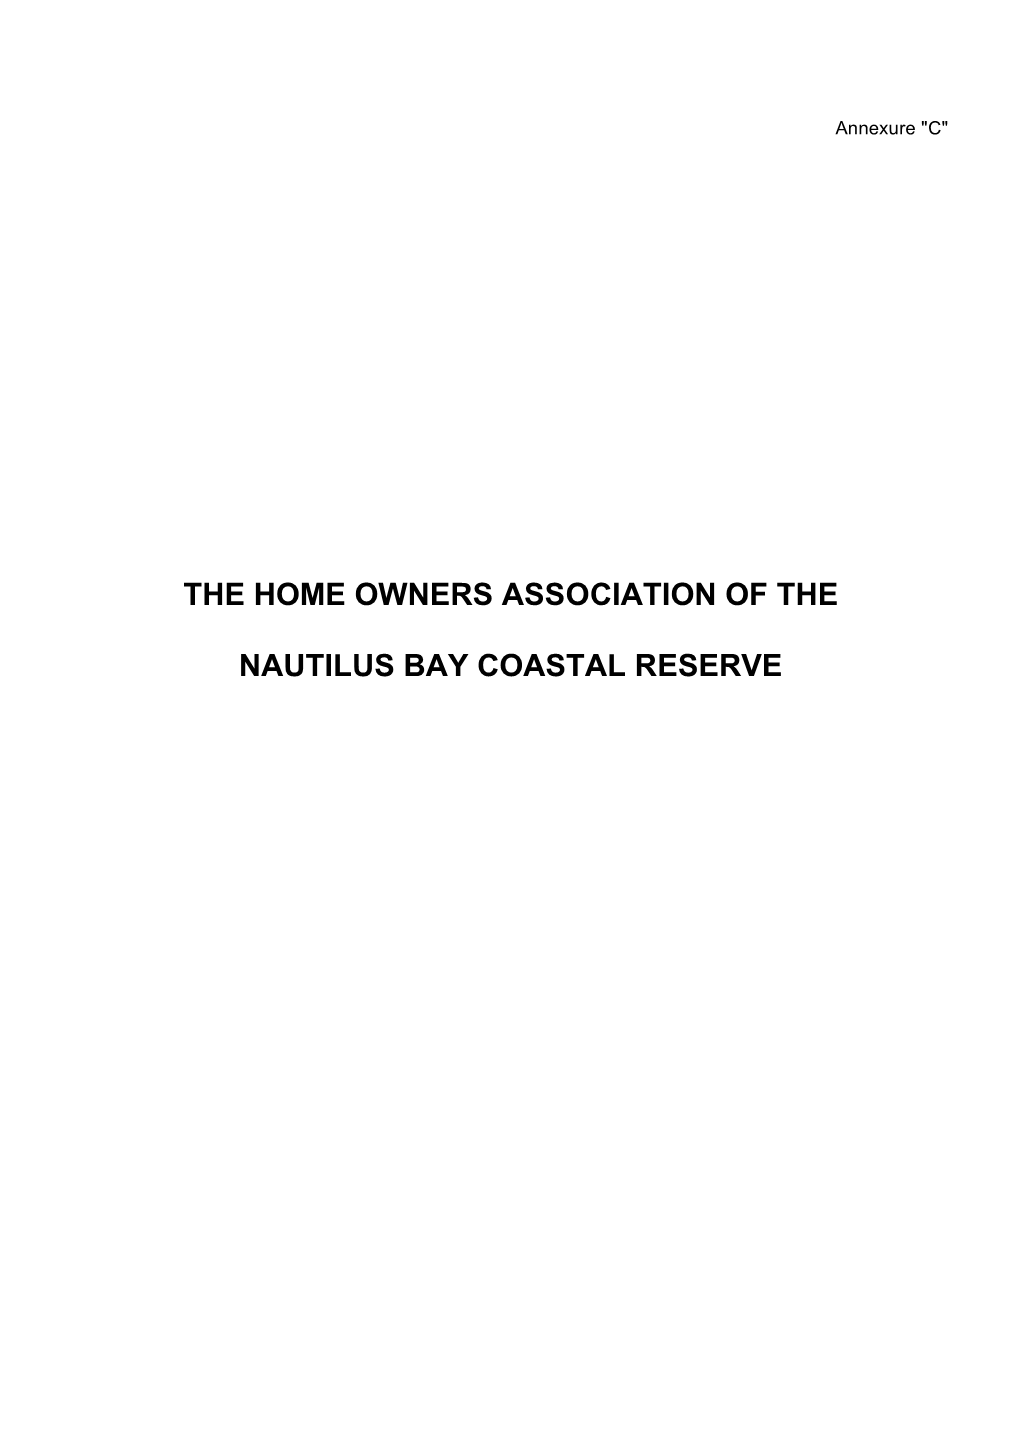 The Home Owners Association of the Nautilus Bay Coastal Reserve"